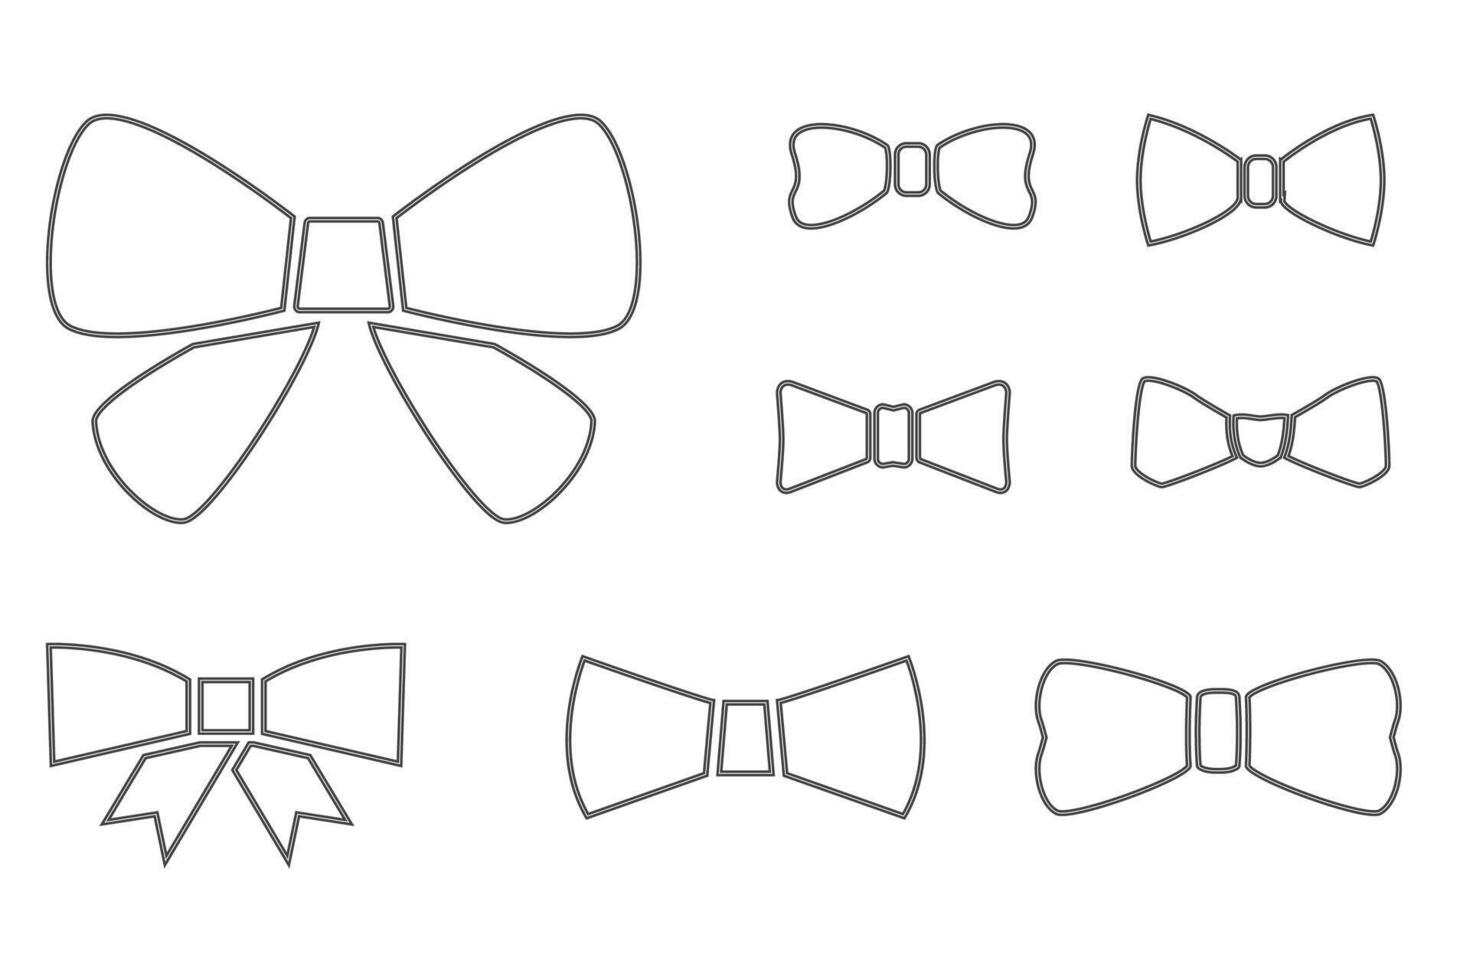 set tie bow silhoutte, vector illustration tie icon isolated on white background